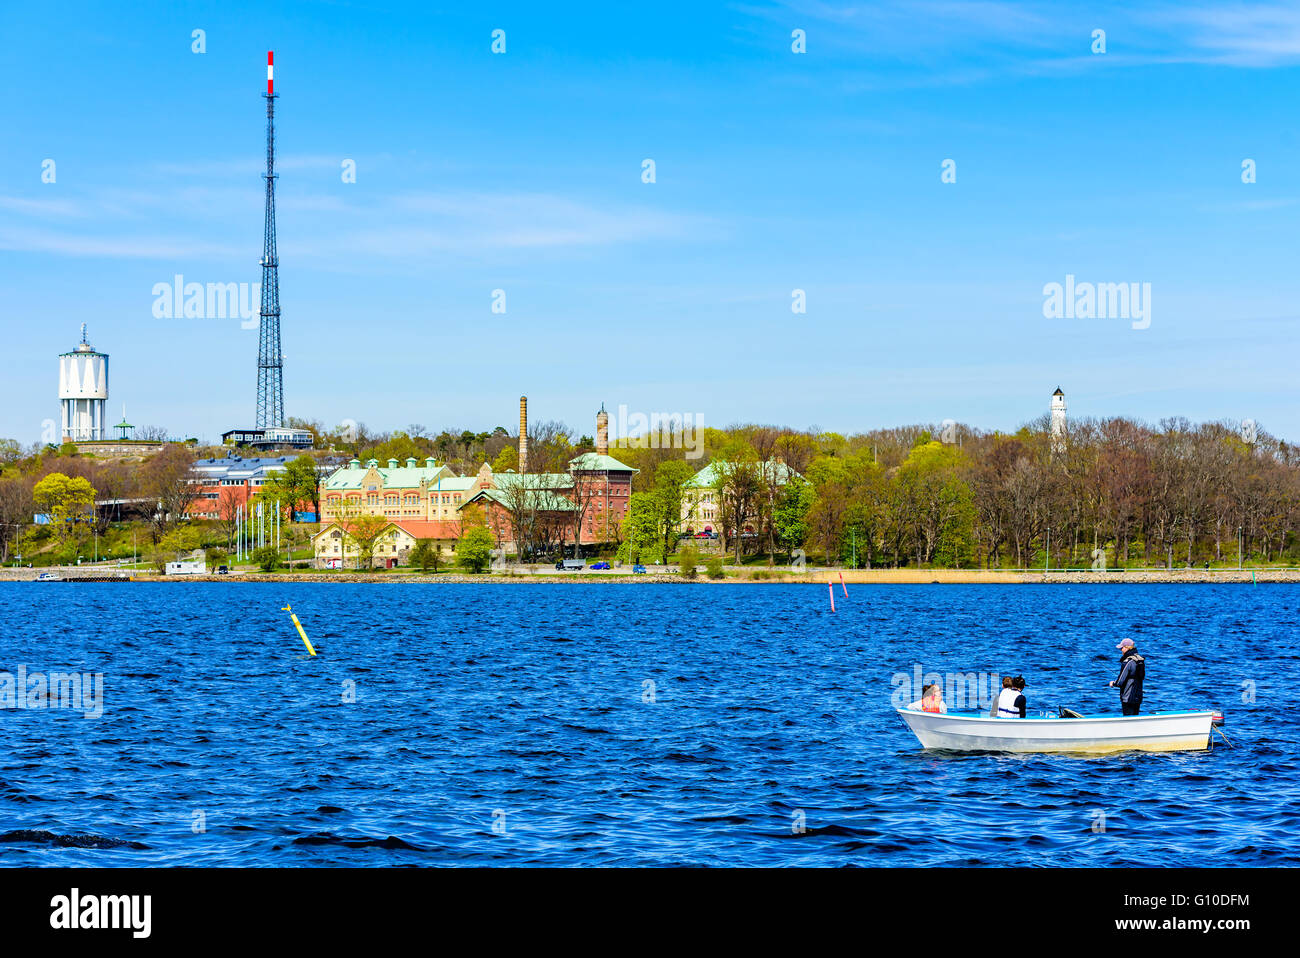 Karlskrona, Sweden - May 03, 2016: Scenic view with four persons in a small open motorboat fishing at sea with coastline in back Stock Photo